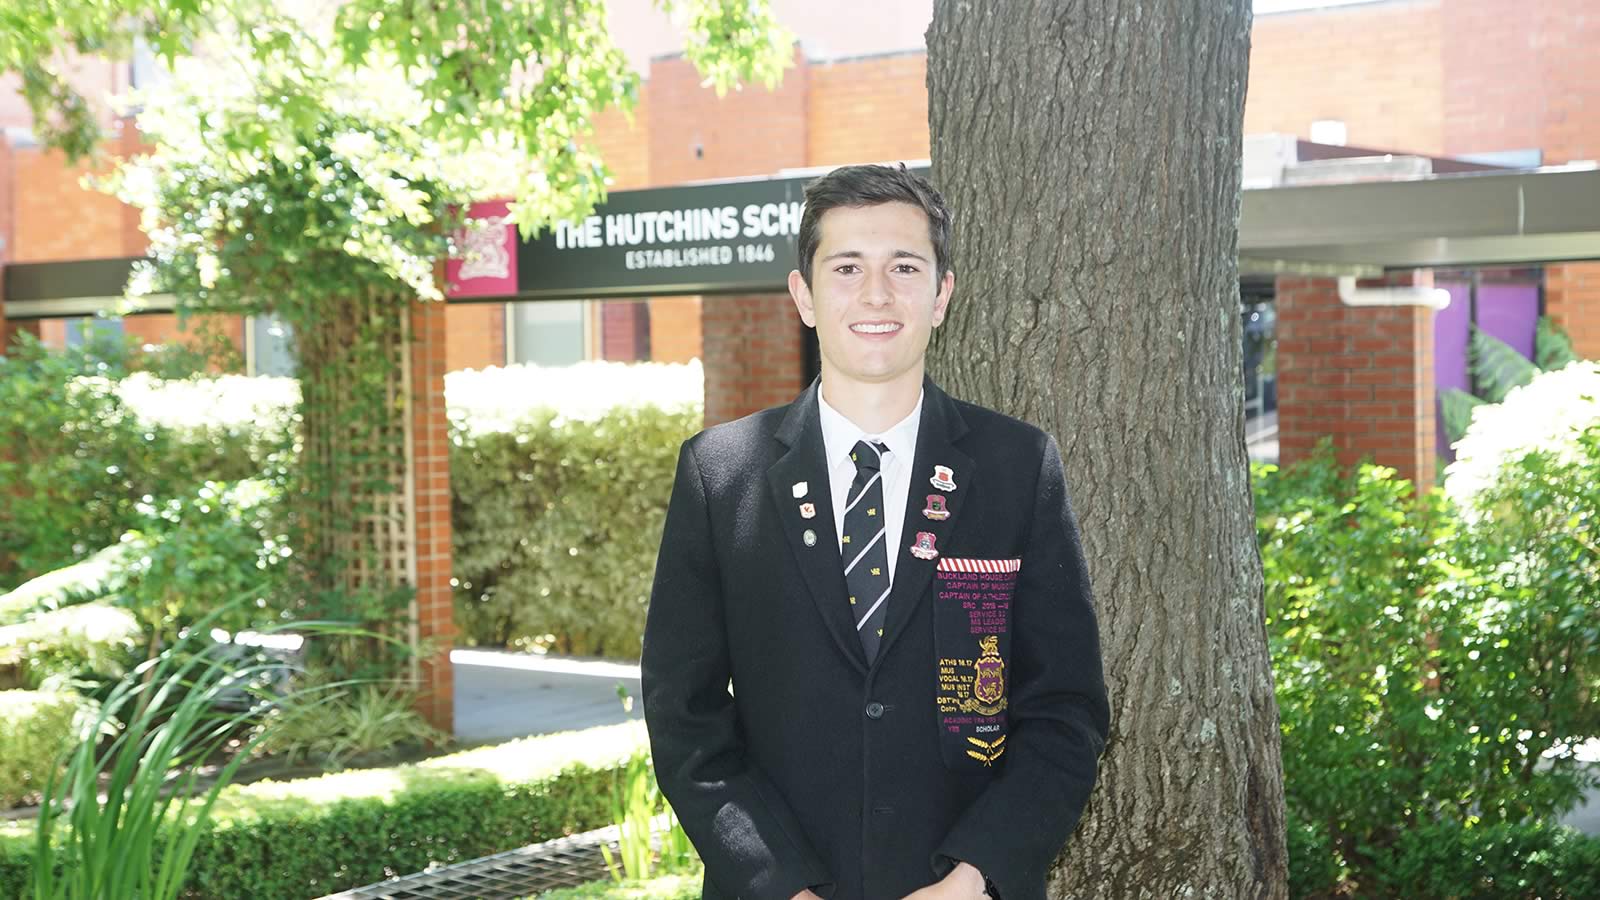 Year 12 student and 2017 Dux James Tucker